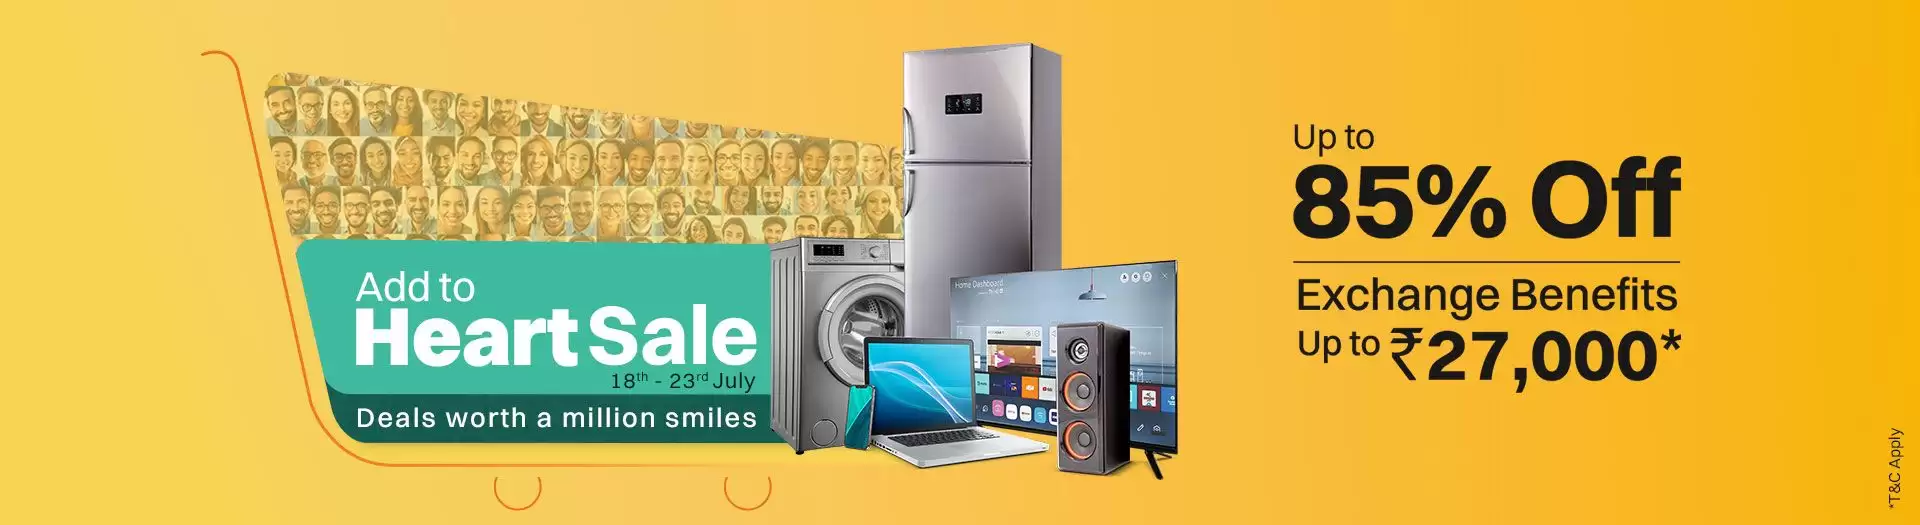 Get Up To 85% Off + Bank & Exchange Offers At Croma Deal Page